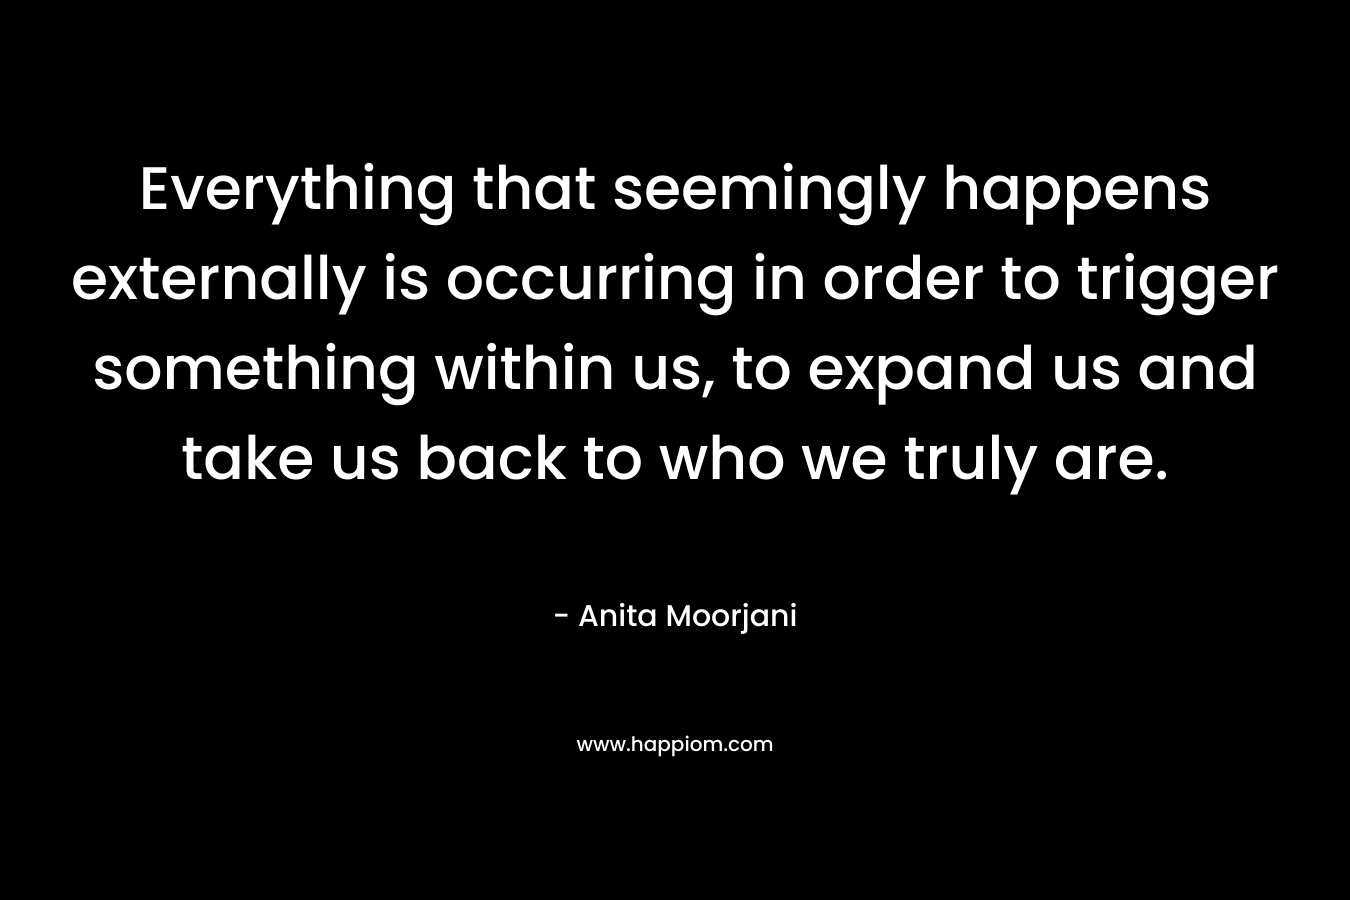 Everything that seemingly happens externally is occurring in order to trigger something within us, to expand us and take us back to who we truly are.